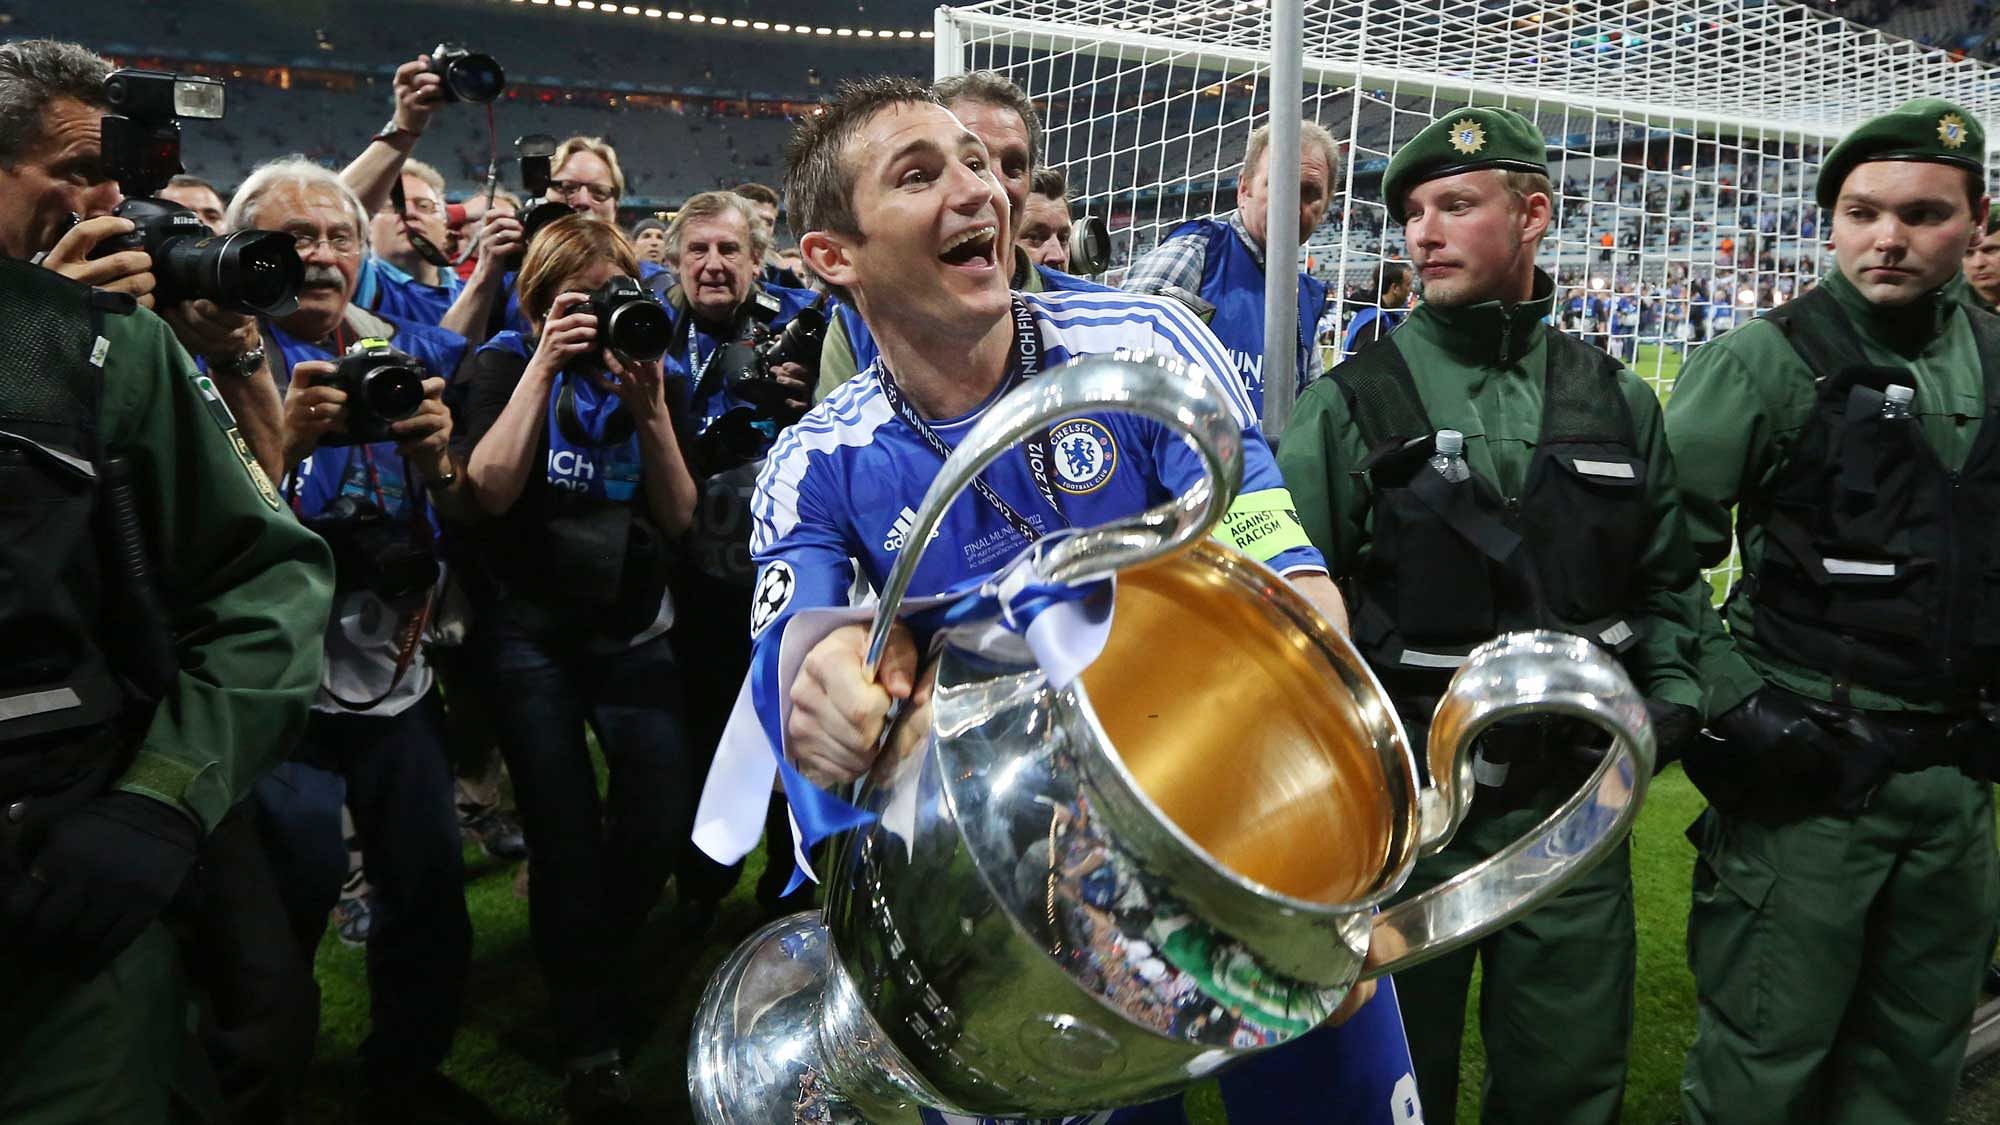 Frank Lampard celebrates with the trophy after the  Champions League final soccer match between Bayern Munich and Chelsea in Munich, Germany Saturday May 19, 2012.&nbsp;